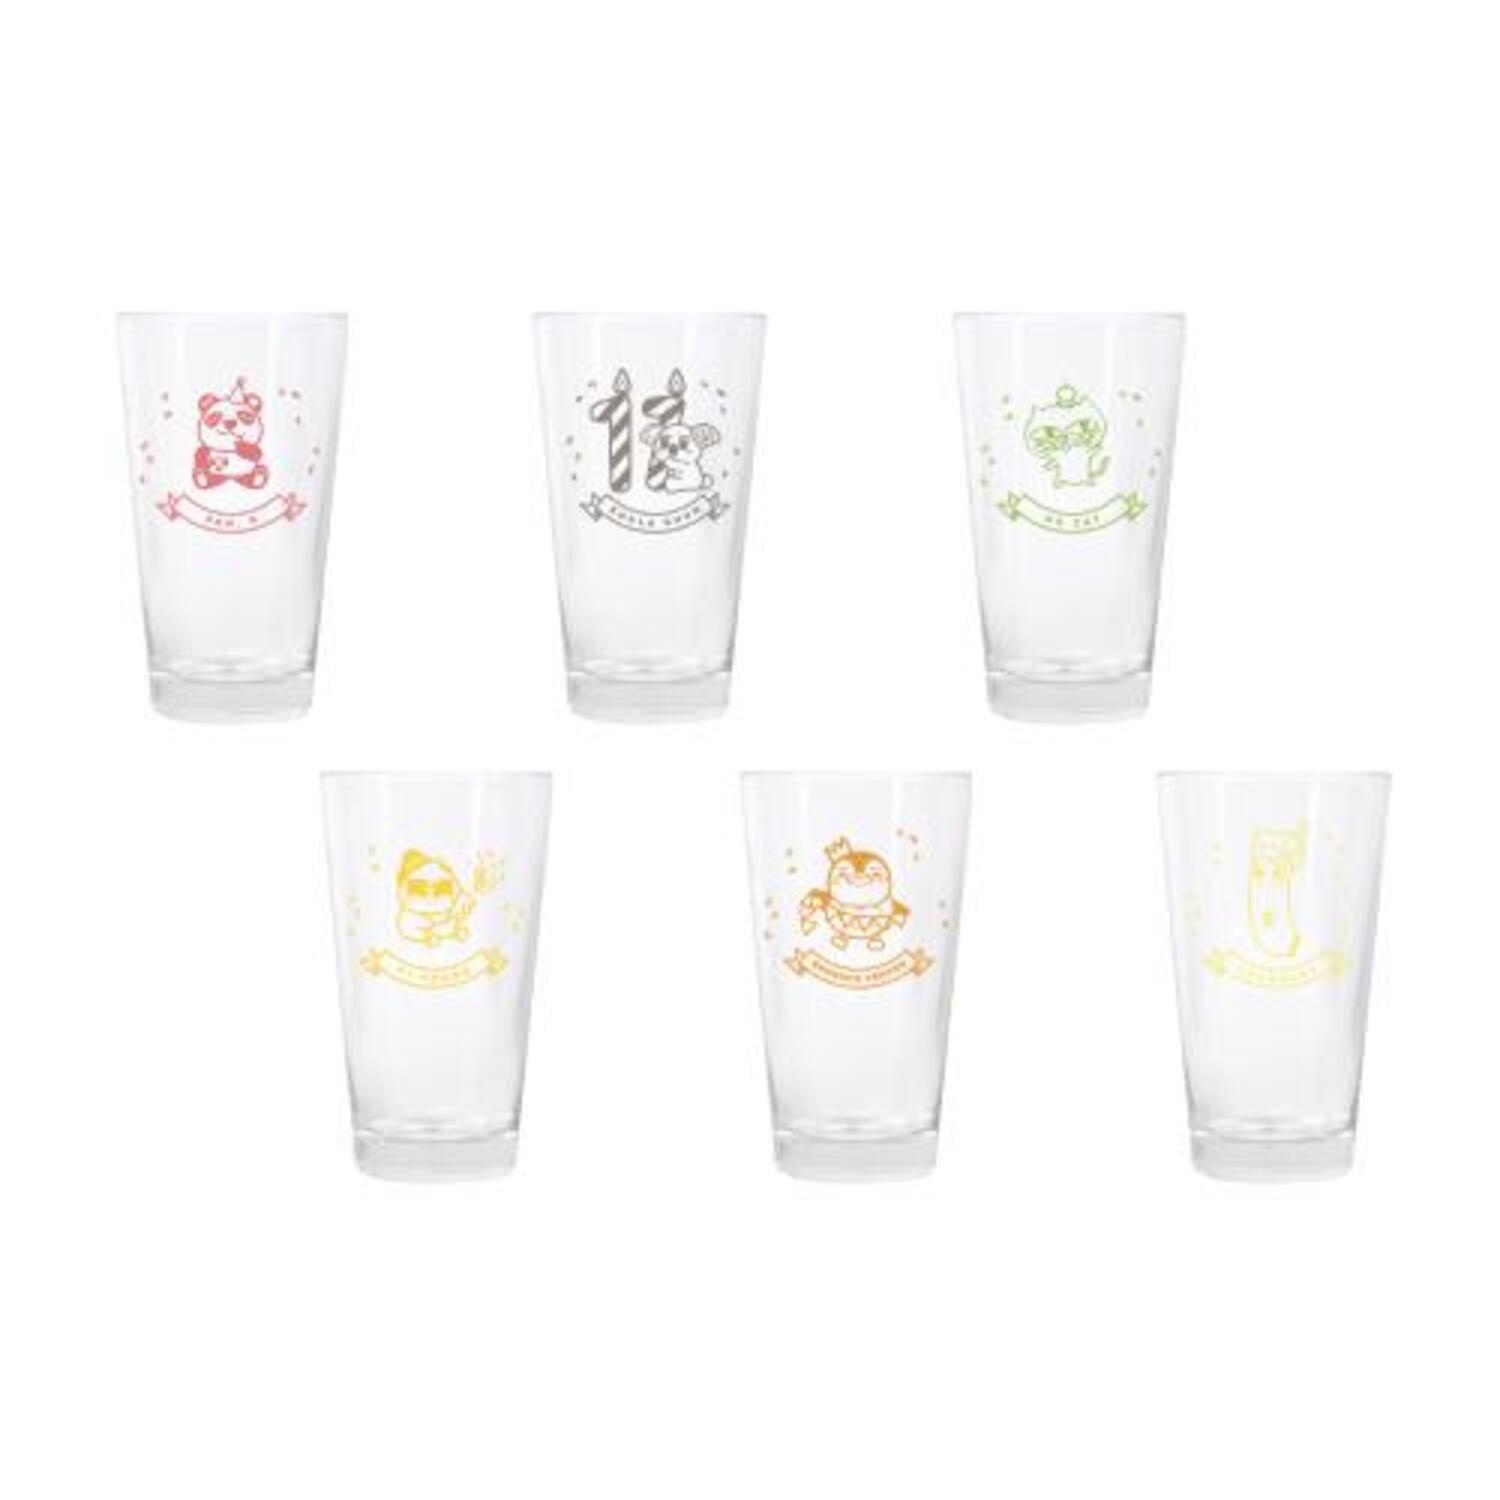 2PM - A11 TIME 2PM OFFICIAL MD / 유리컵(GLASS CUP)